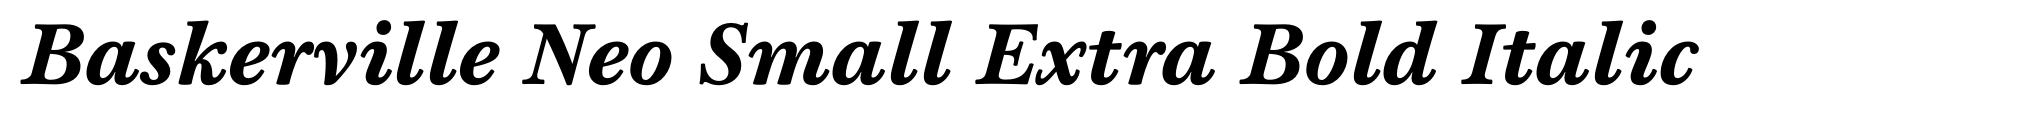 Baskerville Neo Small Extra Bold Italic image